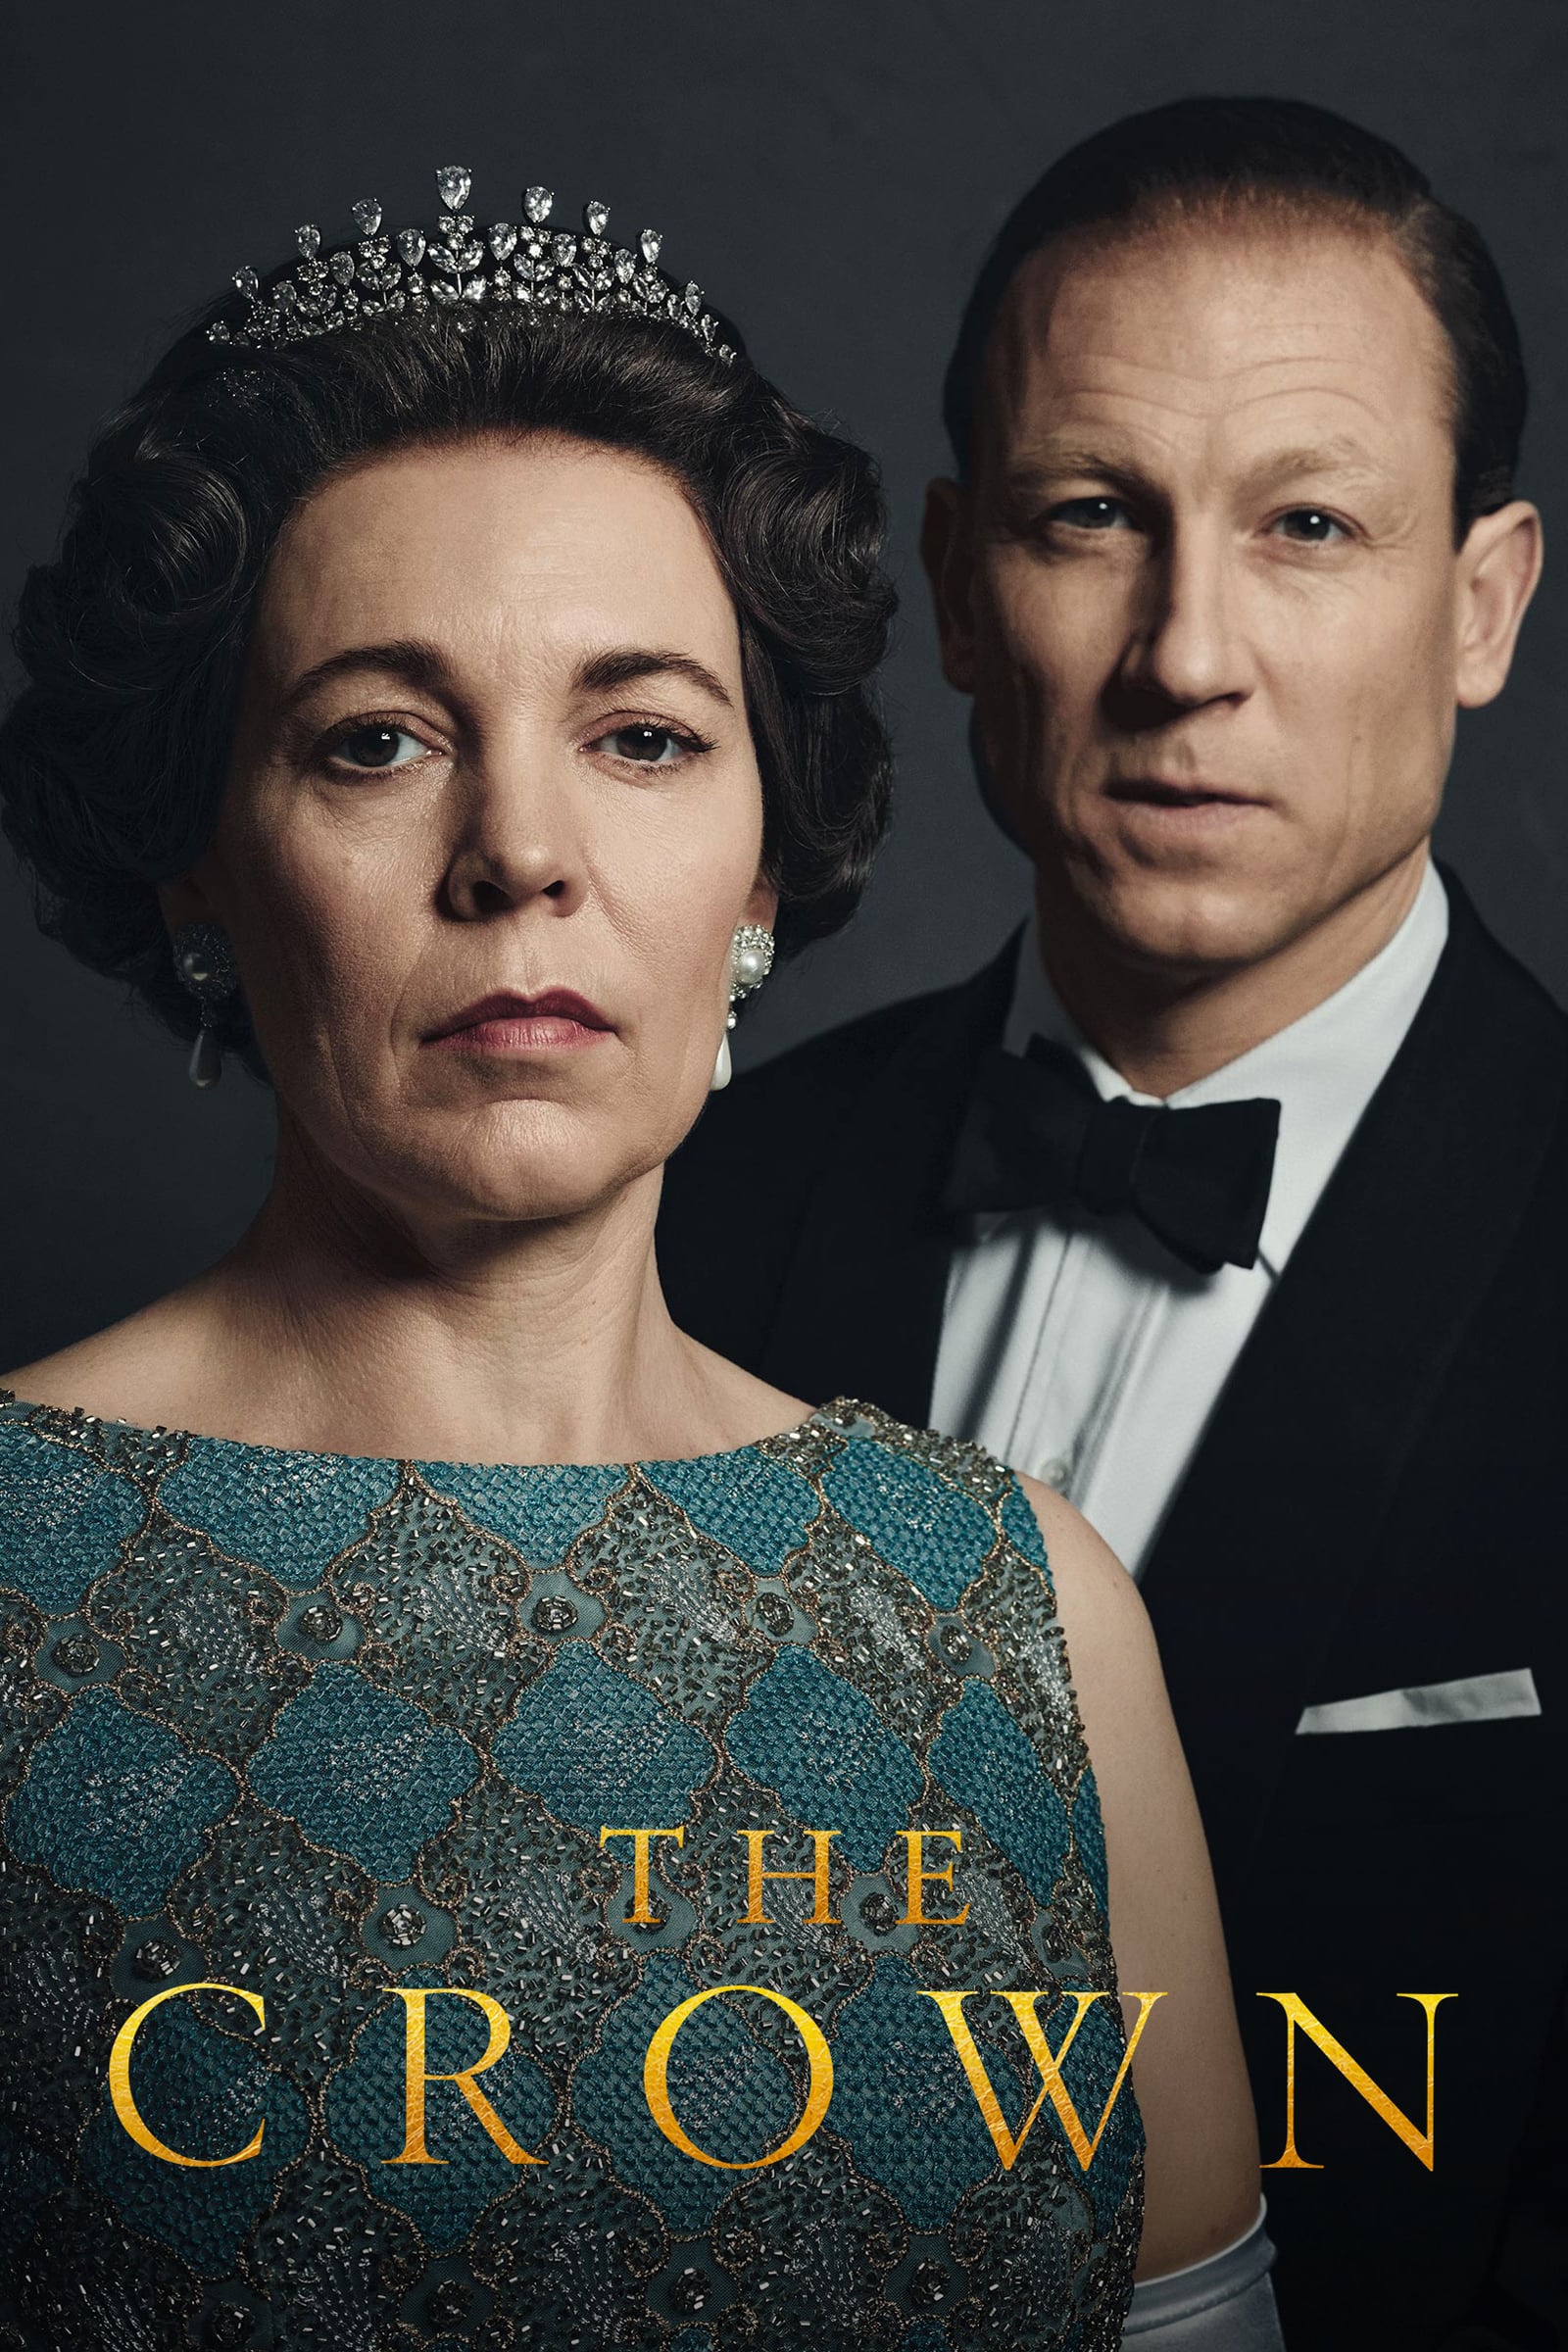 The Crown rating